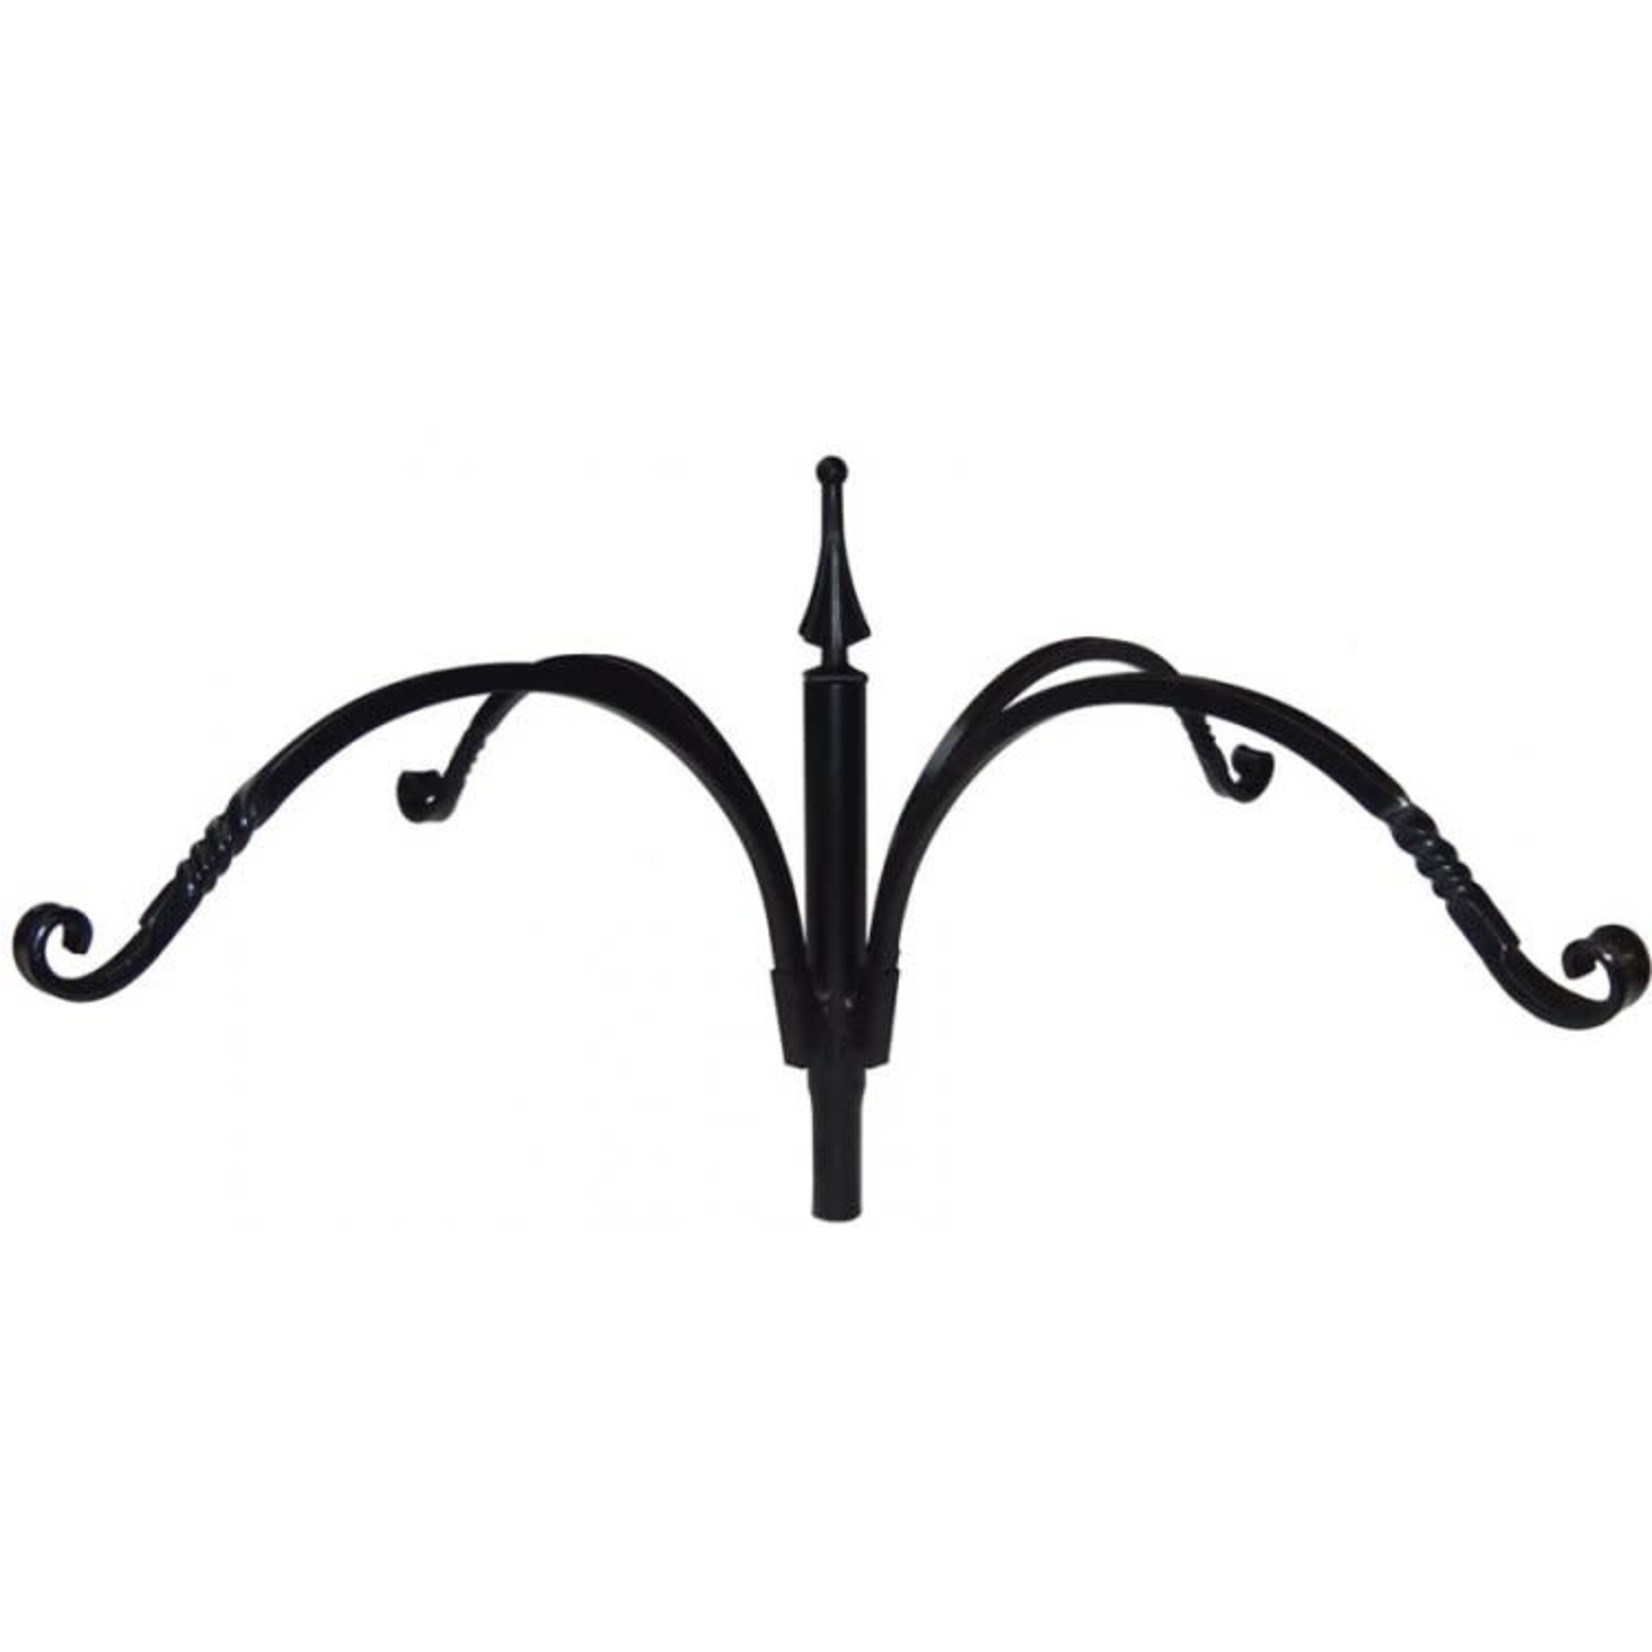 Topper - 4 Arm - Twisted Wrought Iron